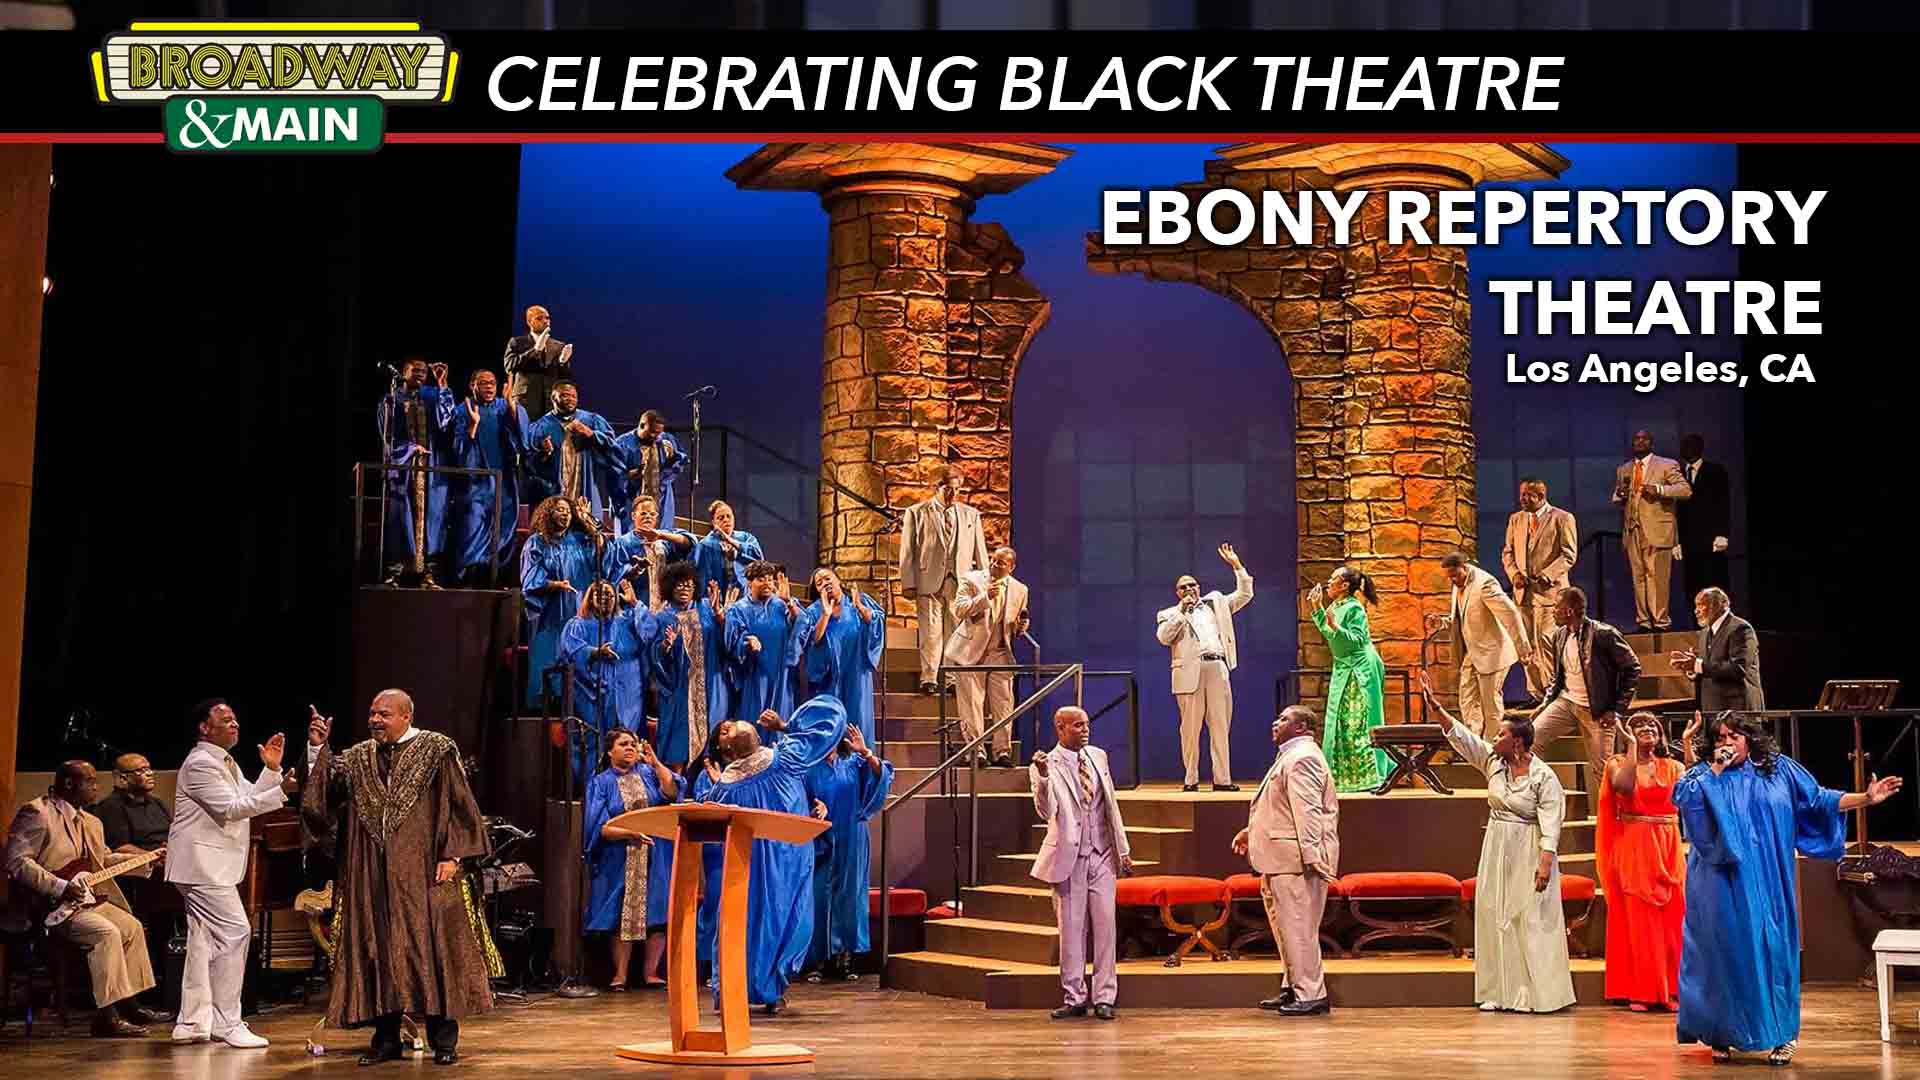 Ebony Rep - A First-Class Theatre Experience To Multicultural Audiences in Los Angeles